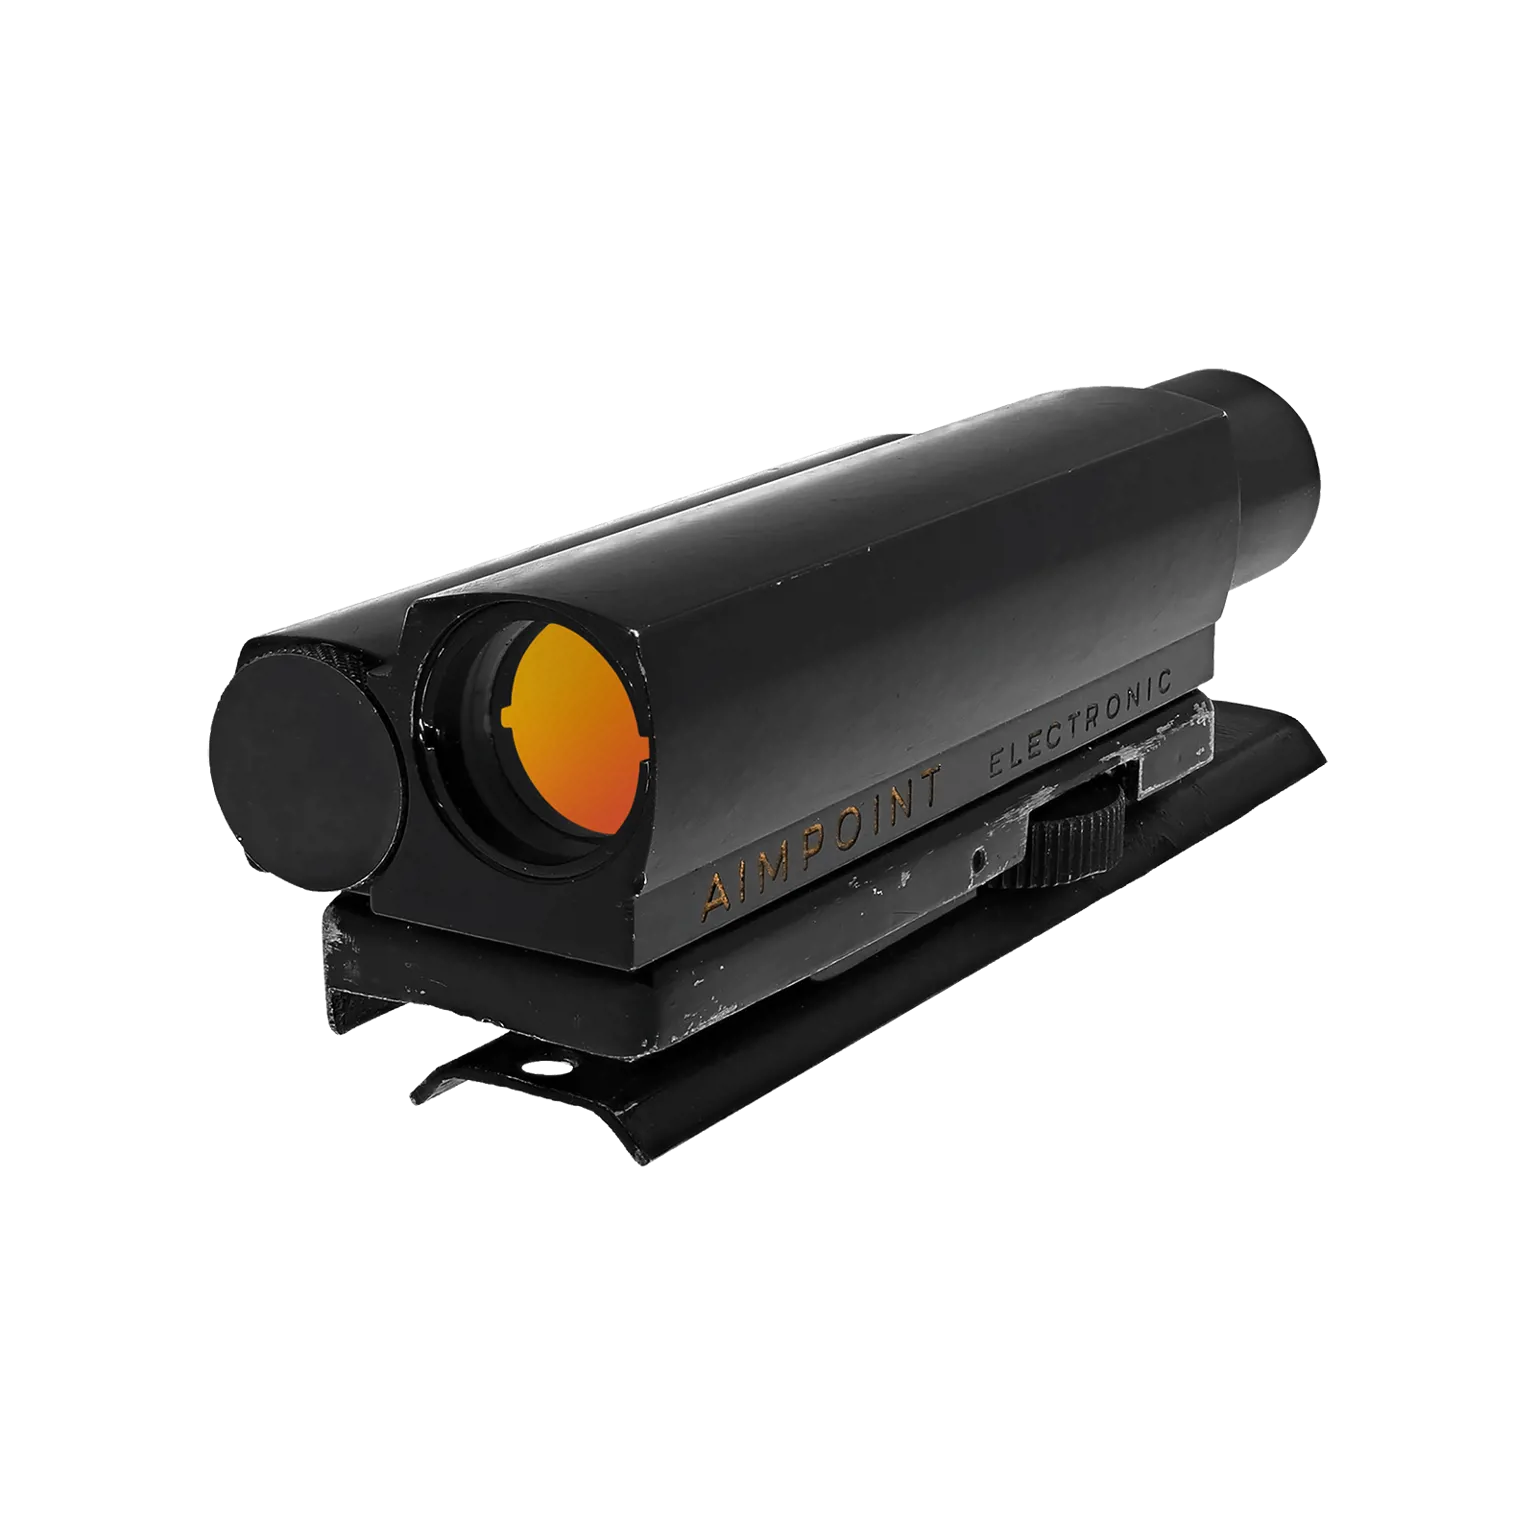 Aimpoint® Electronic Rotpunktvisier  - 1